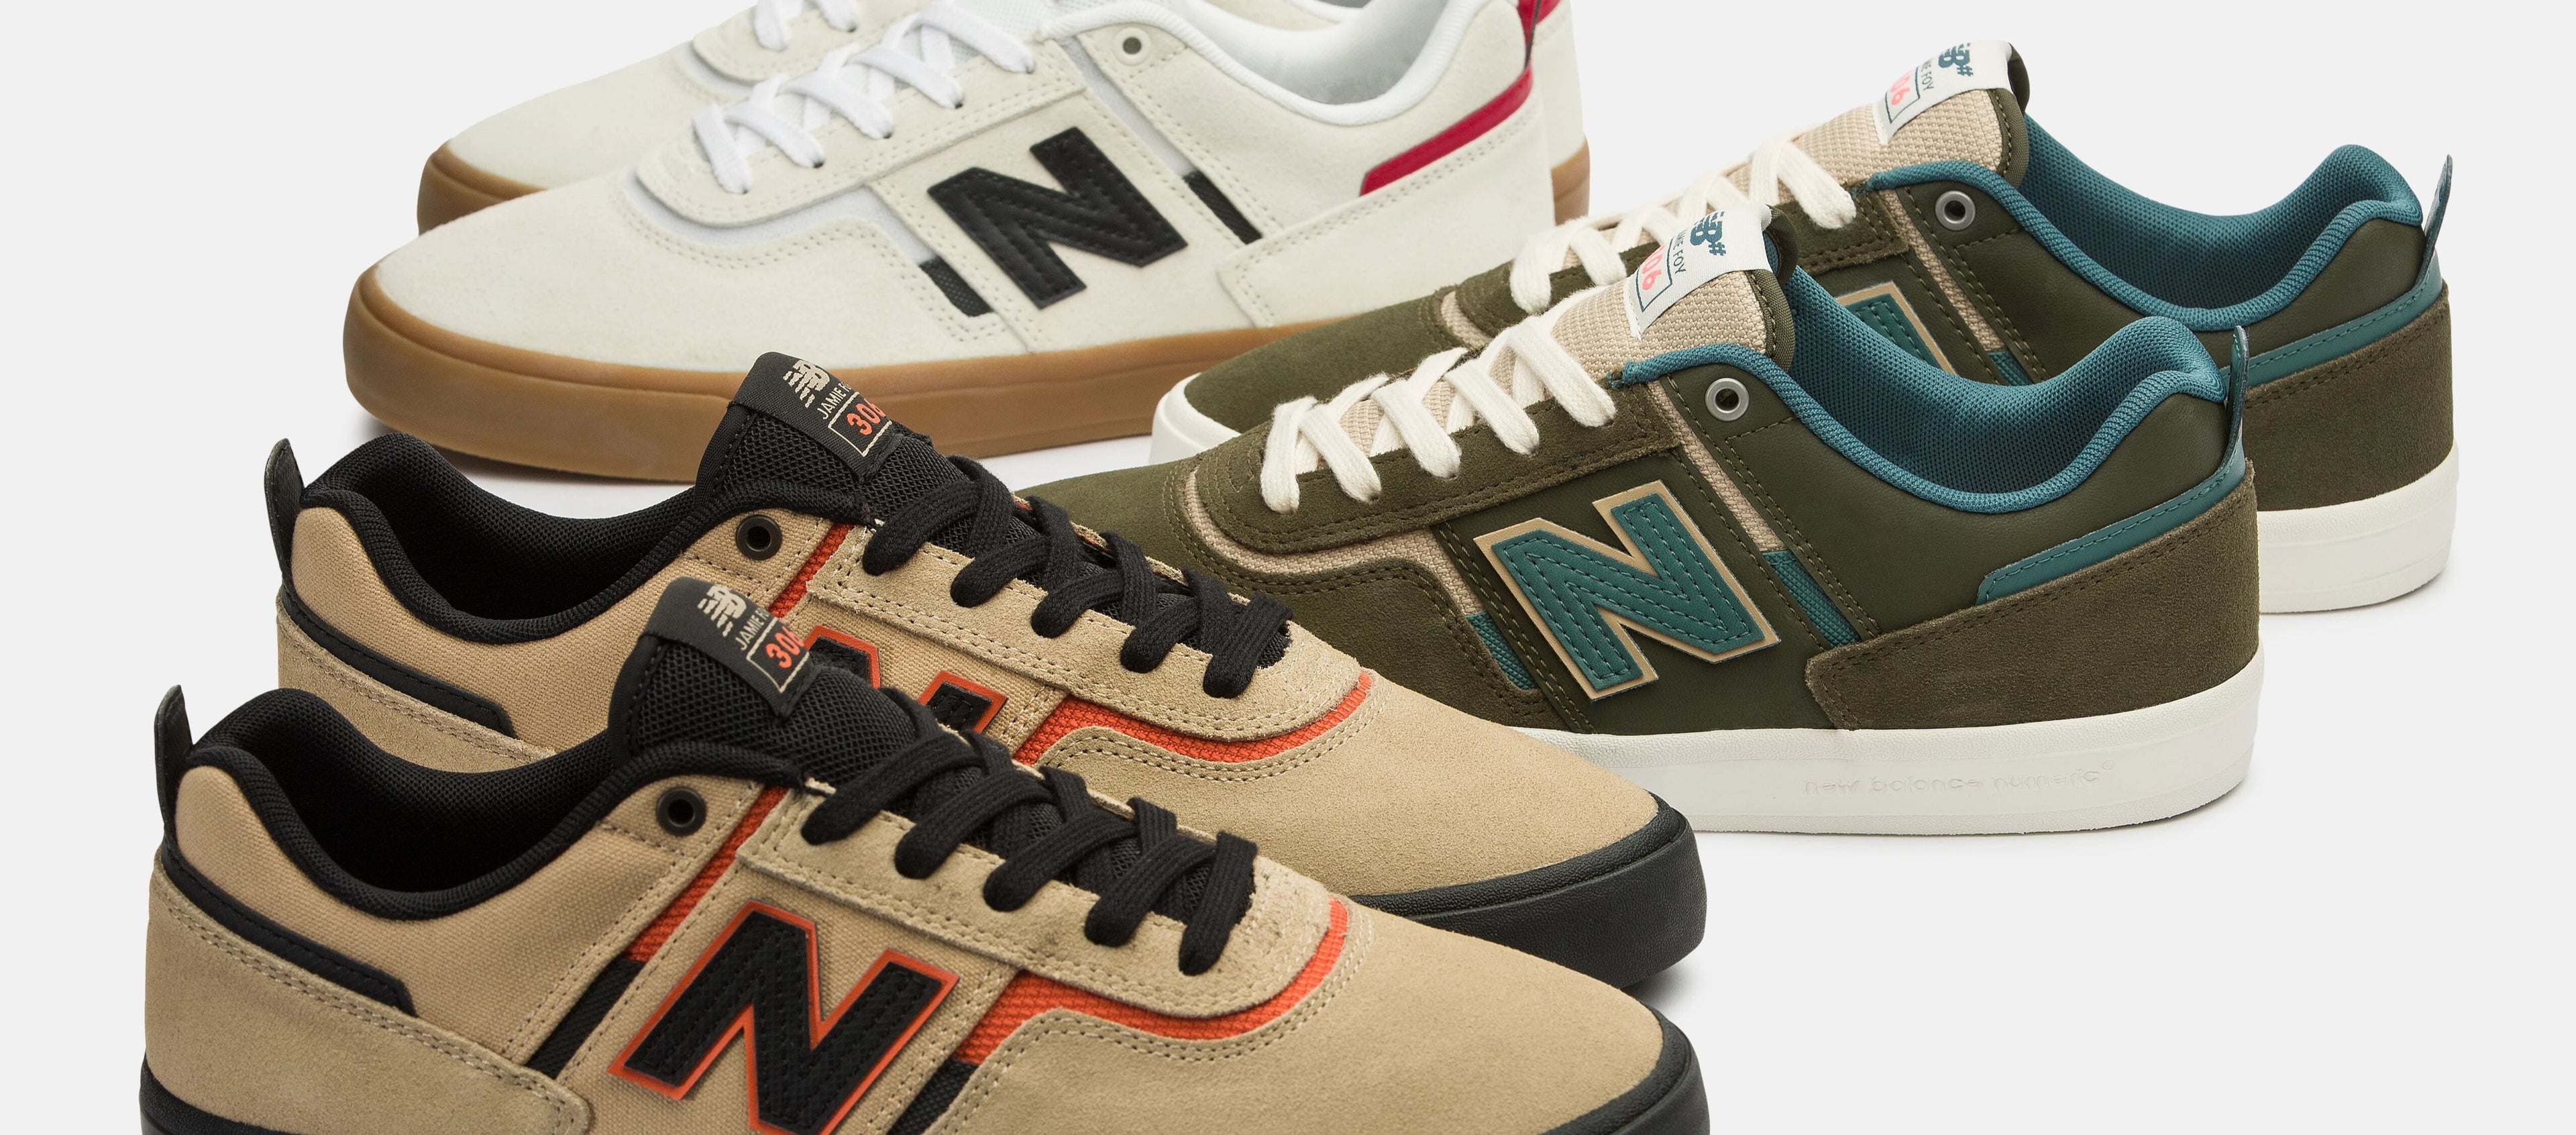 New Balance Numeric Skate Shoes 306 Spring 24